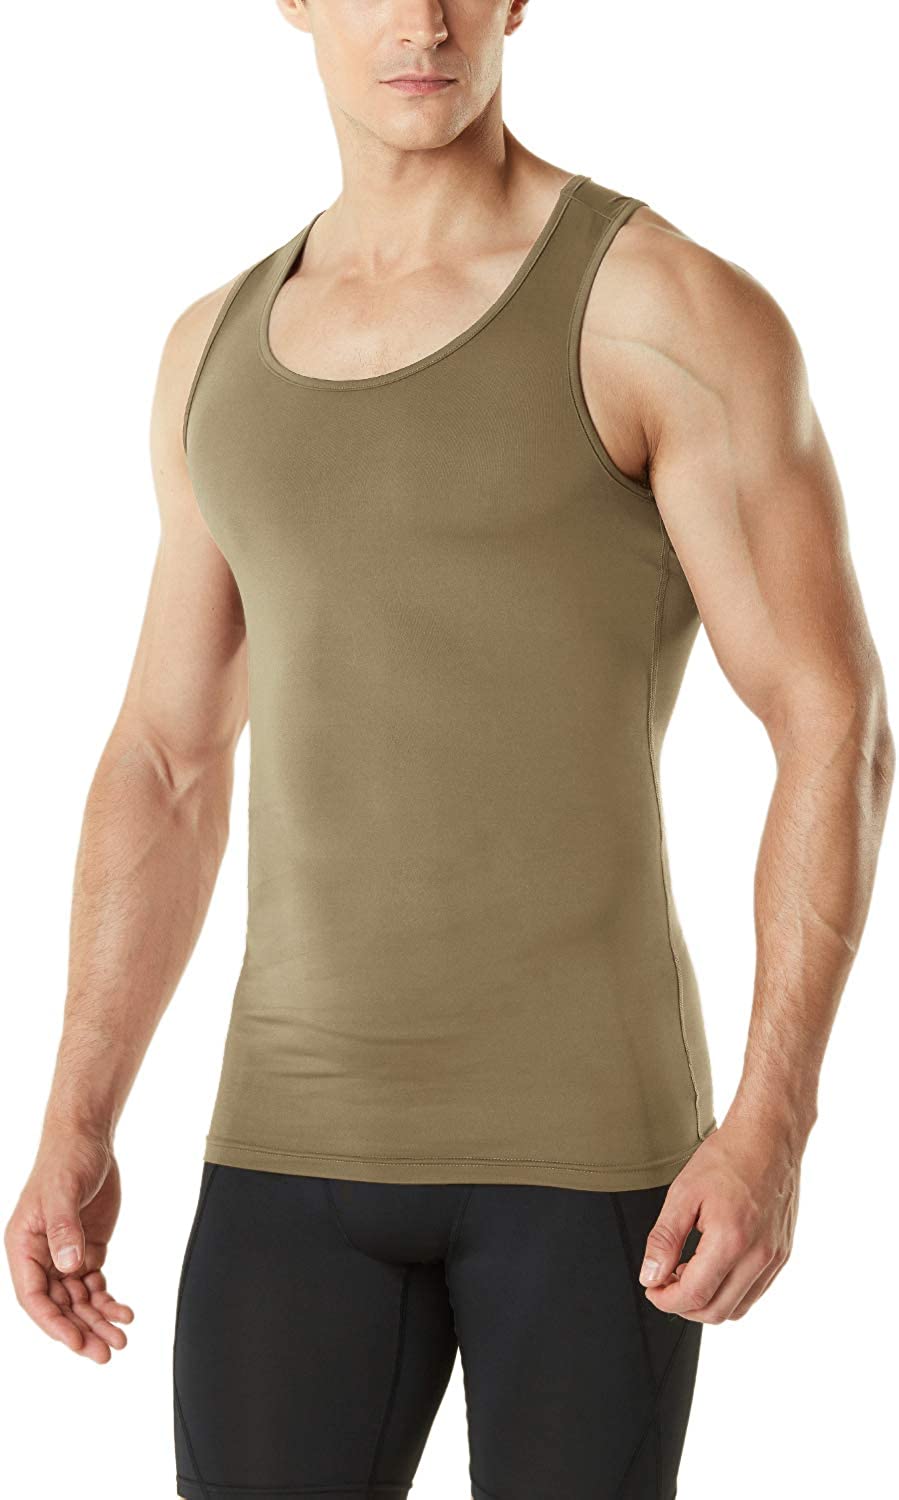 Pack of 1, 3 Sleeveless Muscle Tank Top Cool Dry Compression Baselayer TSLA Mens 